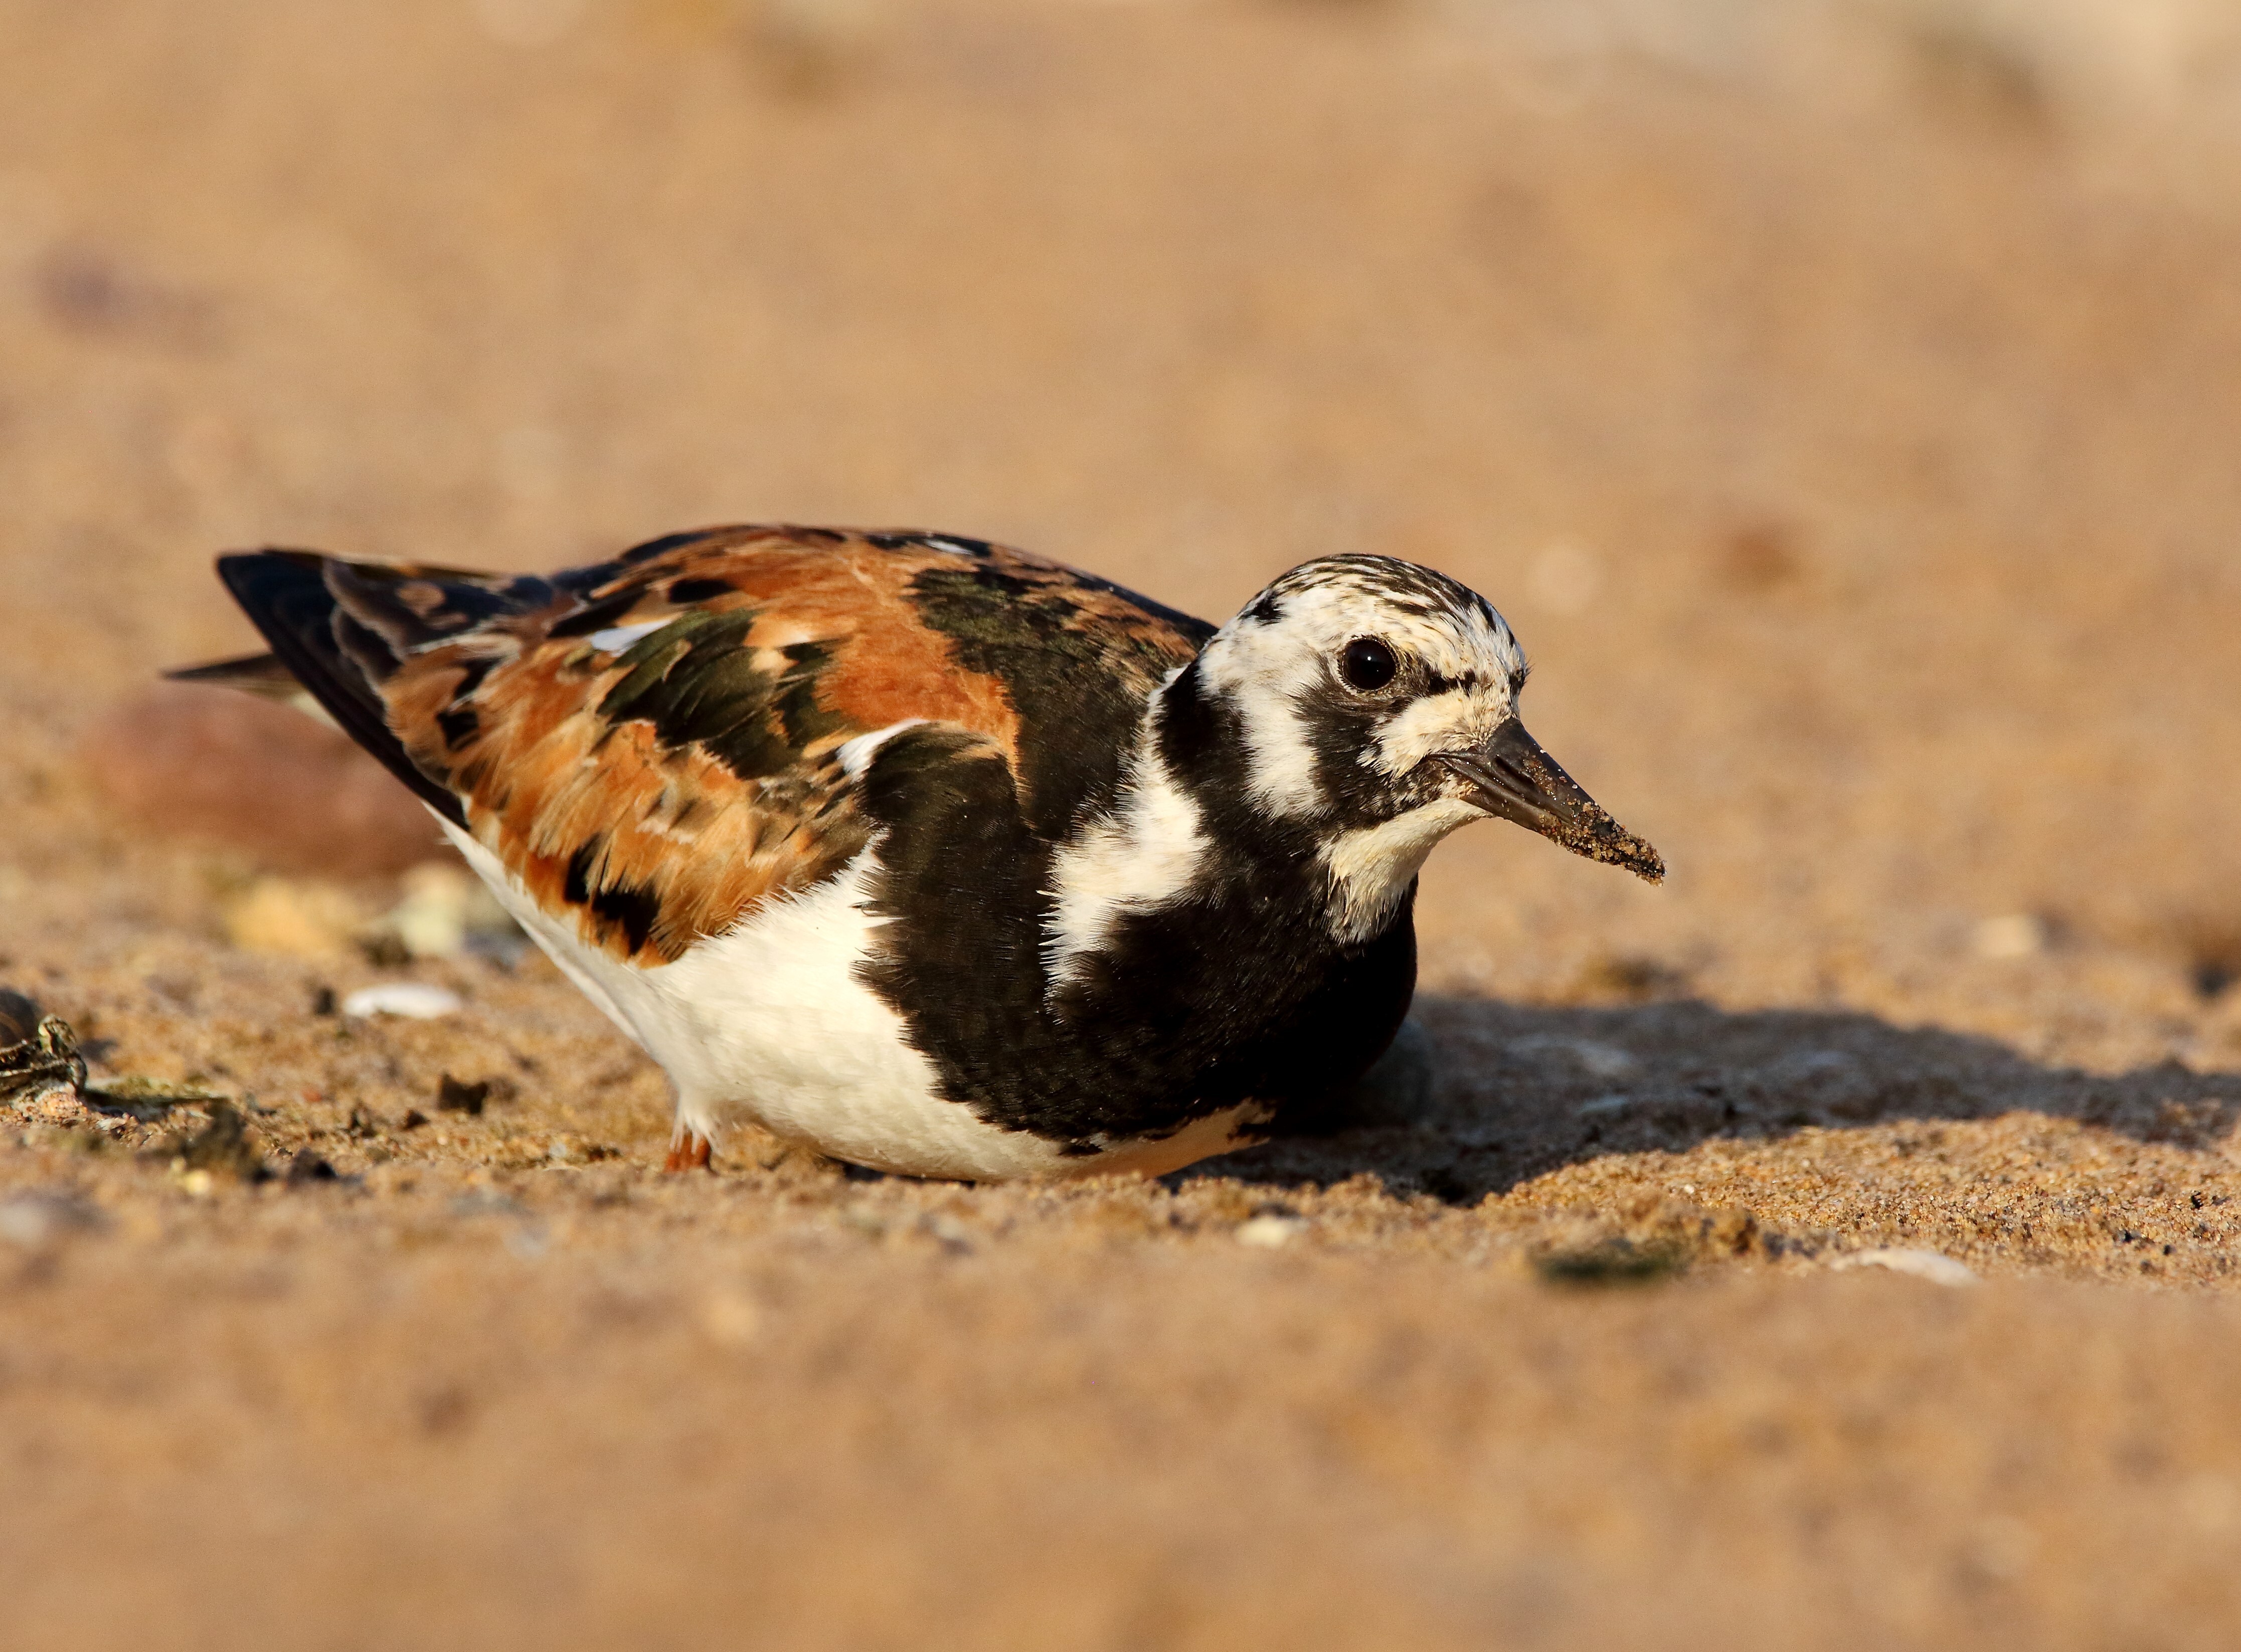 A Ruddy Turnstone takes a rest on Wolfe's Pond Beach. Photo: <a href="https://www.flickr.com/photos/120553232@N02/" target="_blank">Isaac Grant</a>